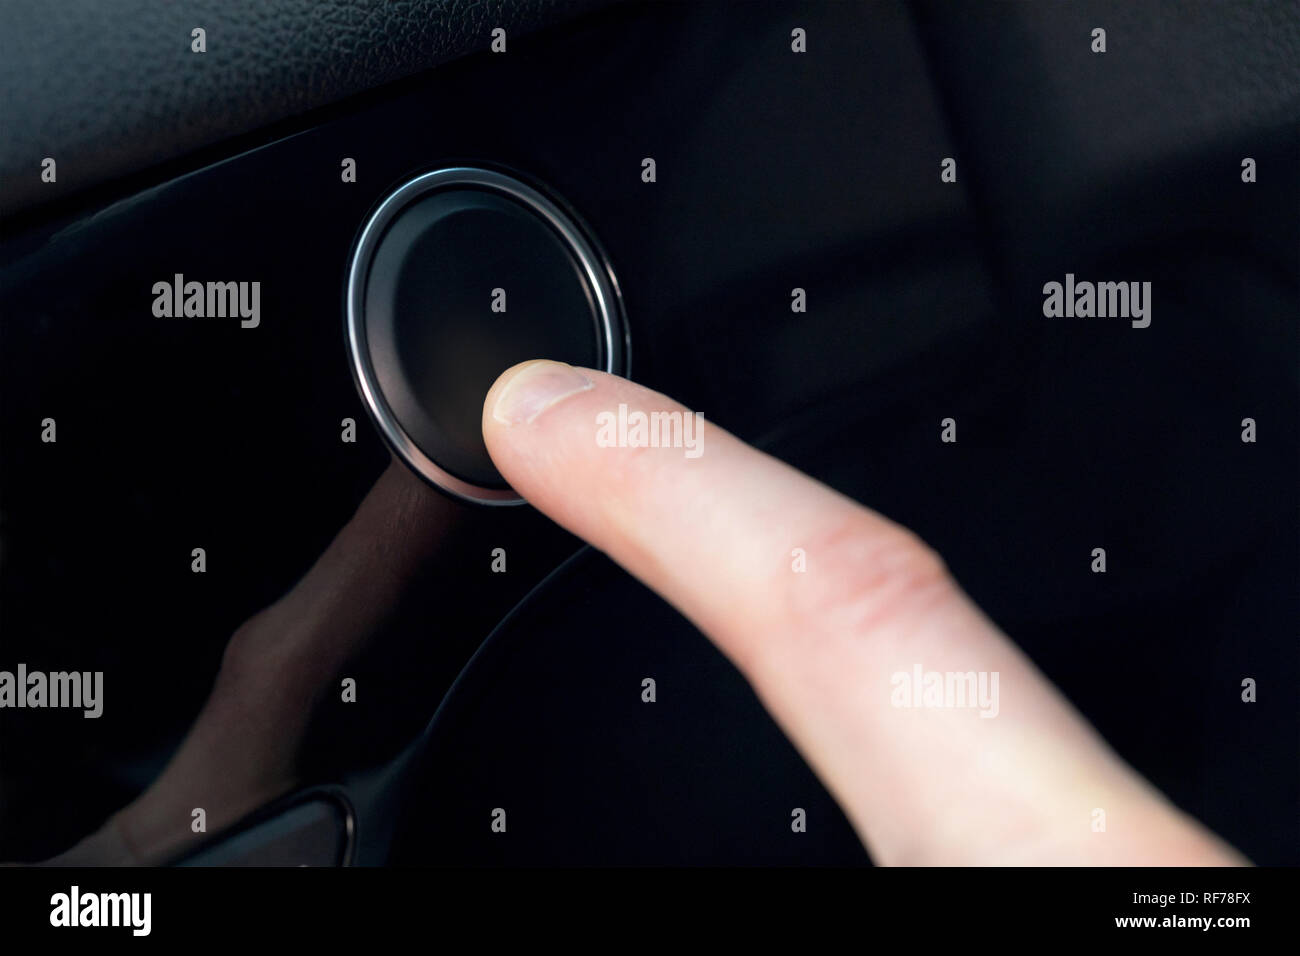 Finger pressing a button in a car Stock Photo